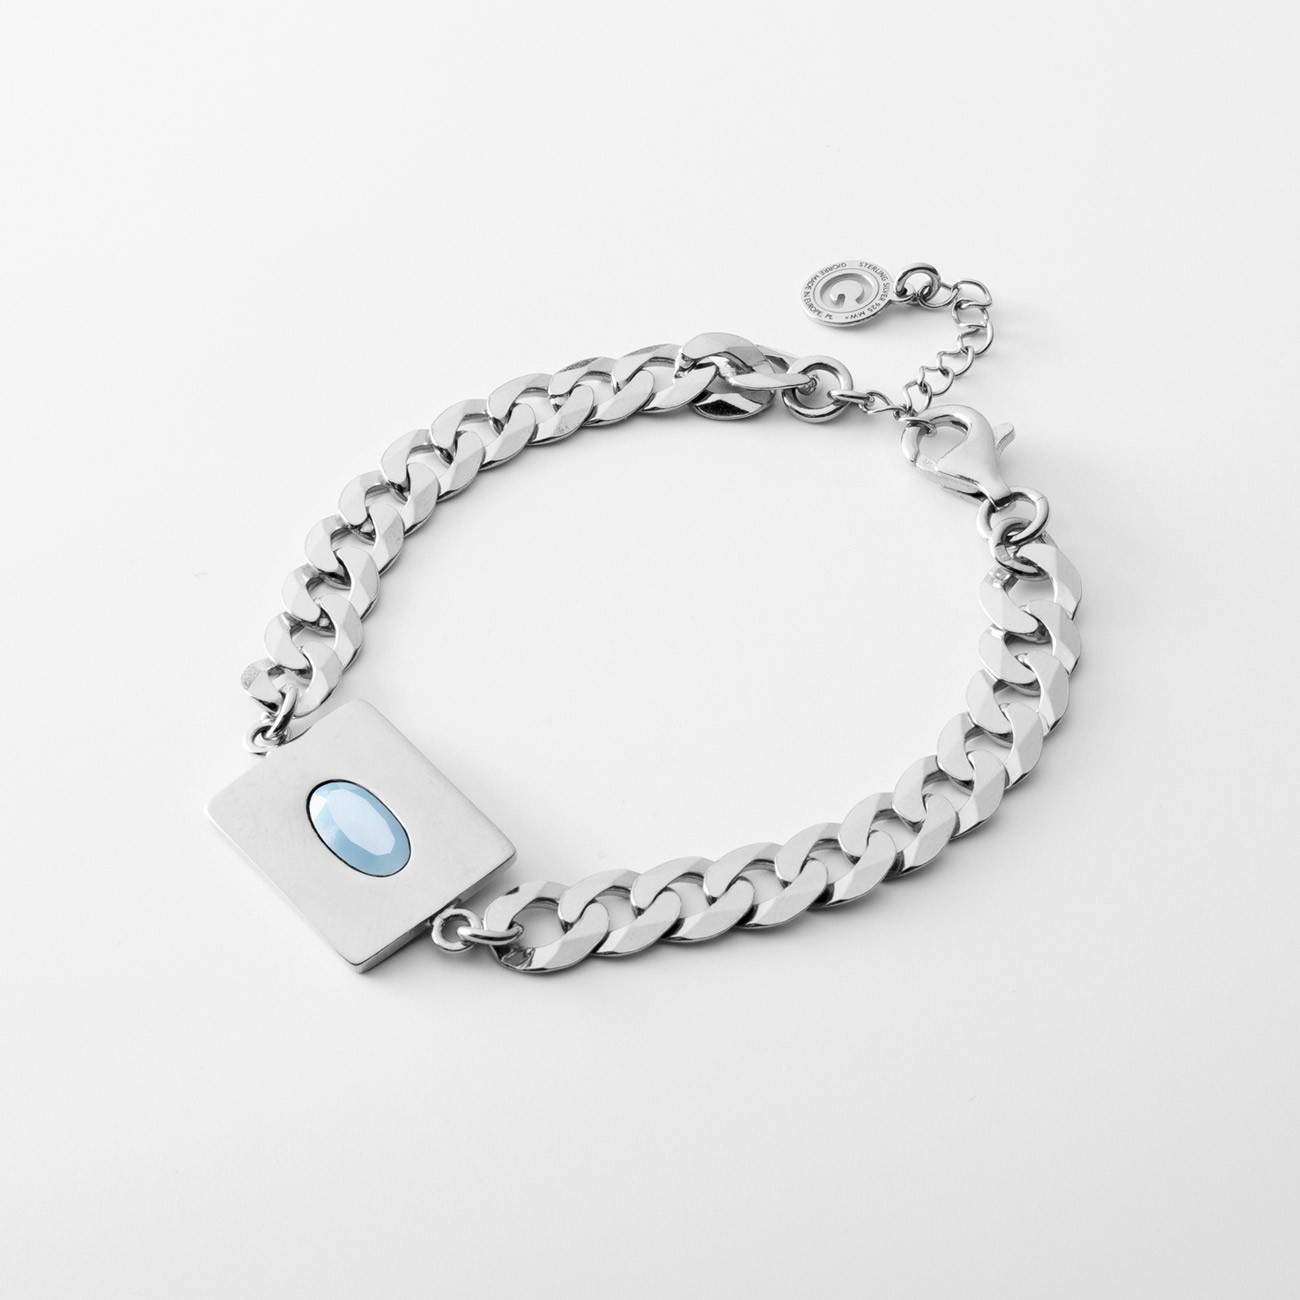 Bracelet with rectangle pendant colorful stone